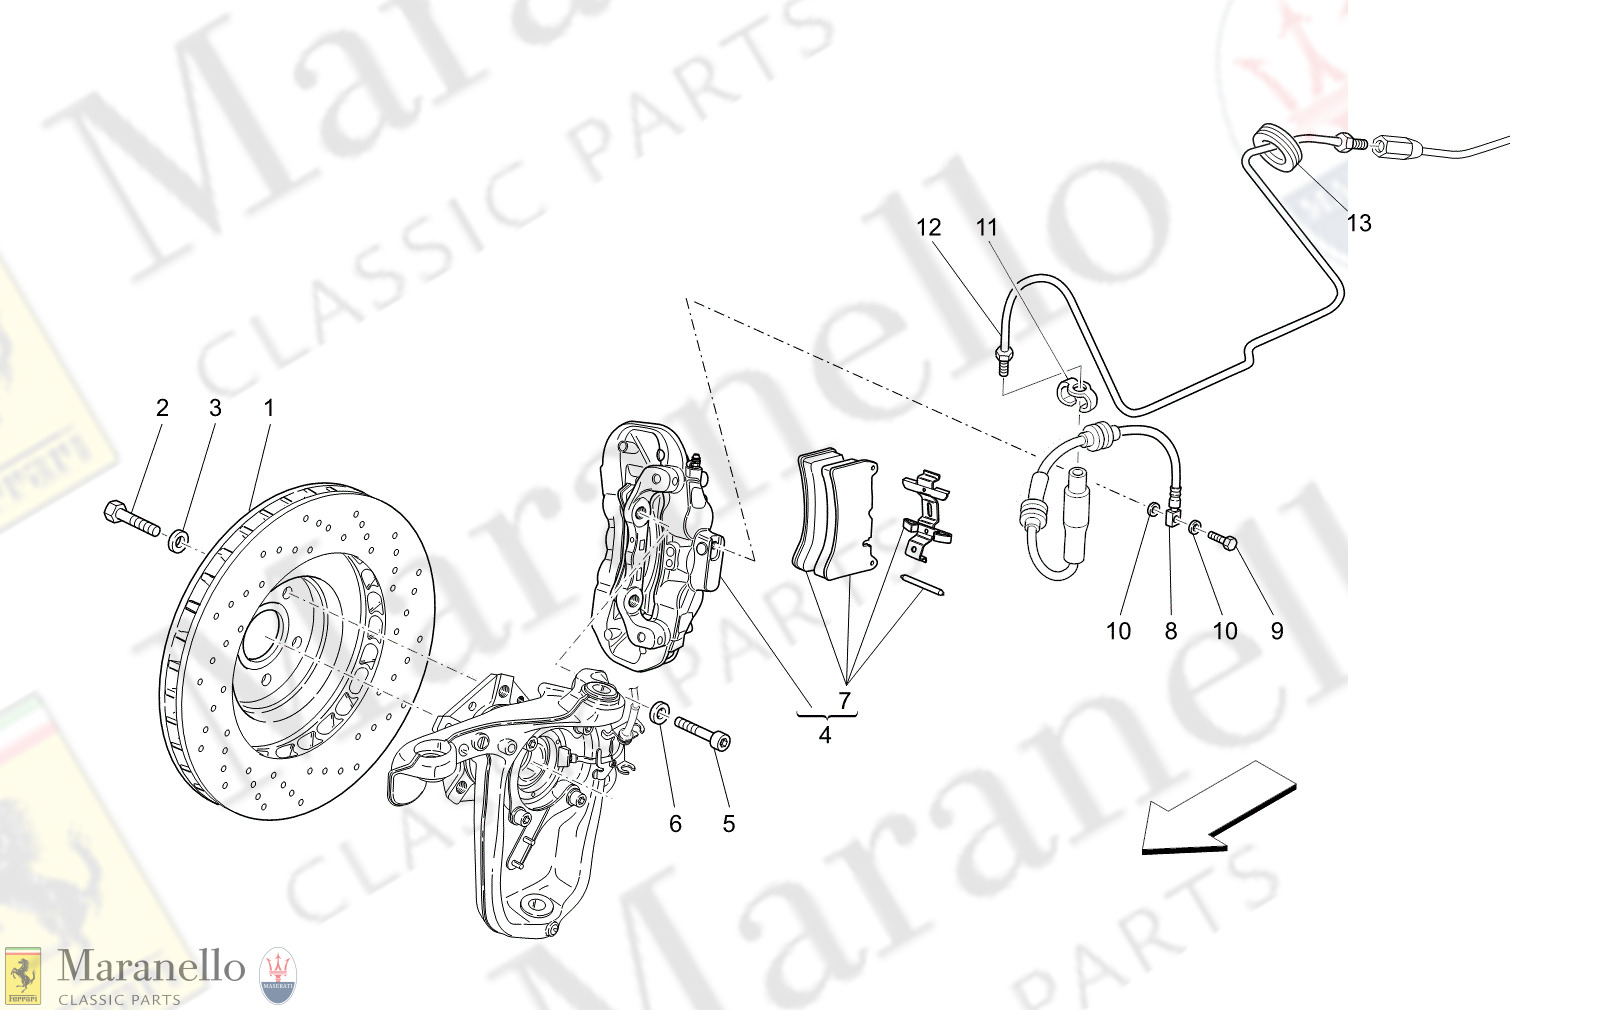 04.10 - 1 - 0410 - 1 Braking Devices On Front Wheels